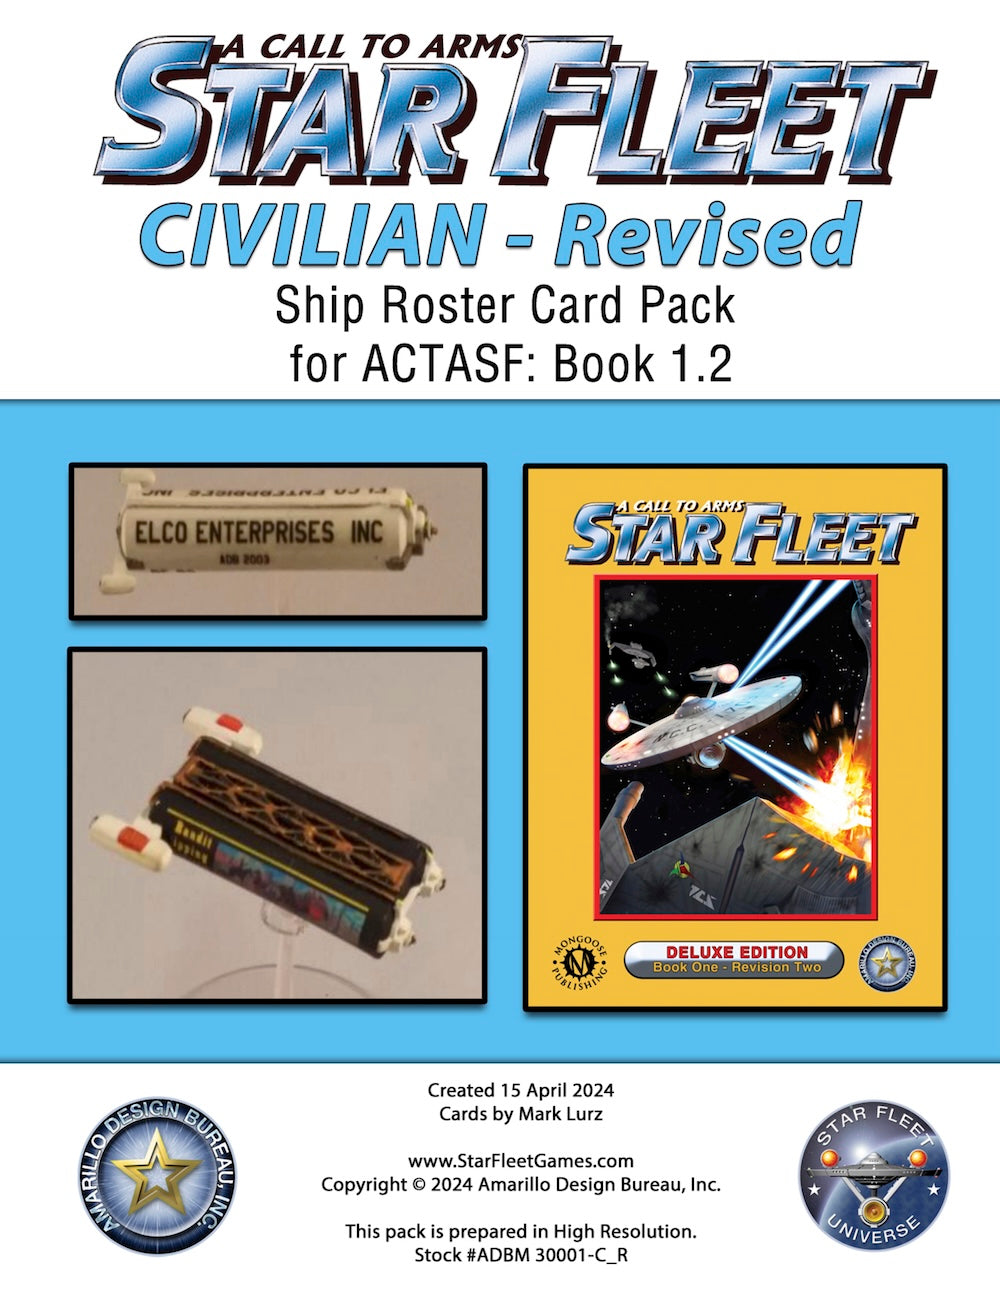 A Call to Arms: Star Fleet Book 1.2: Civilian Ship Roster Pack Revised